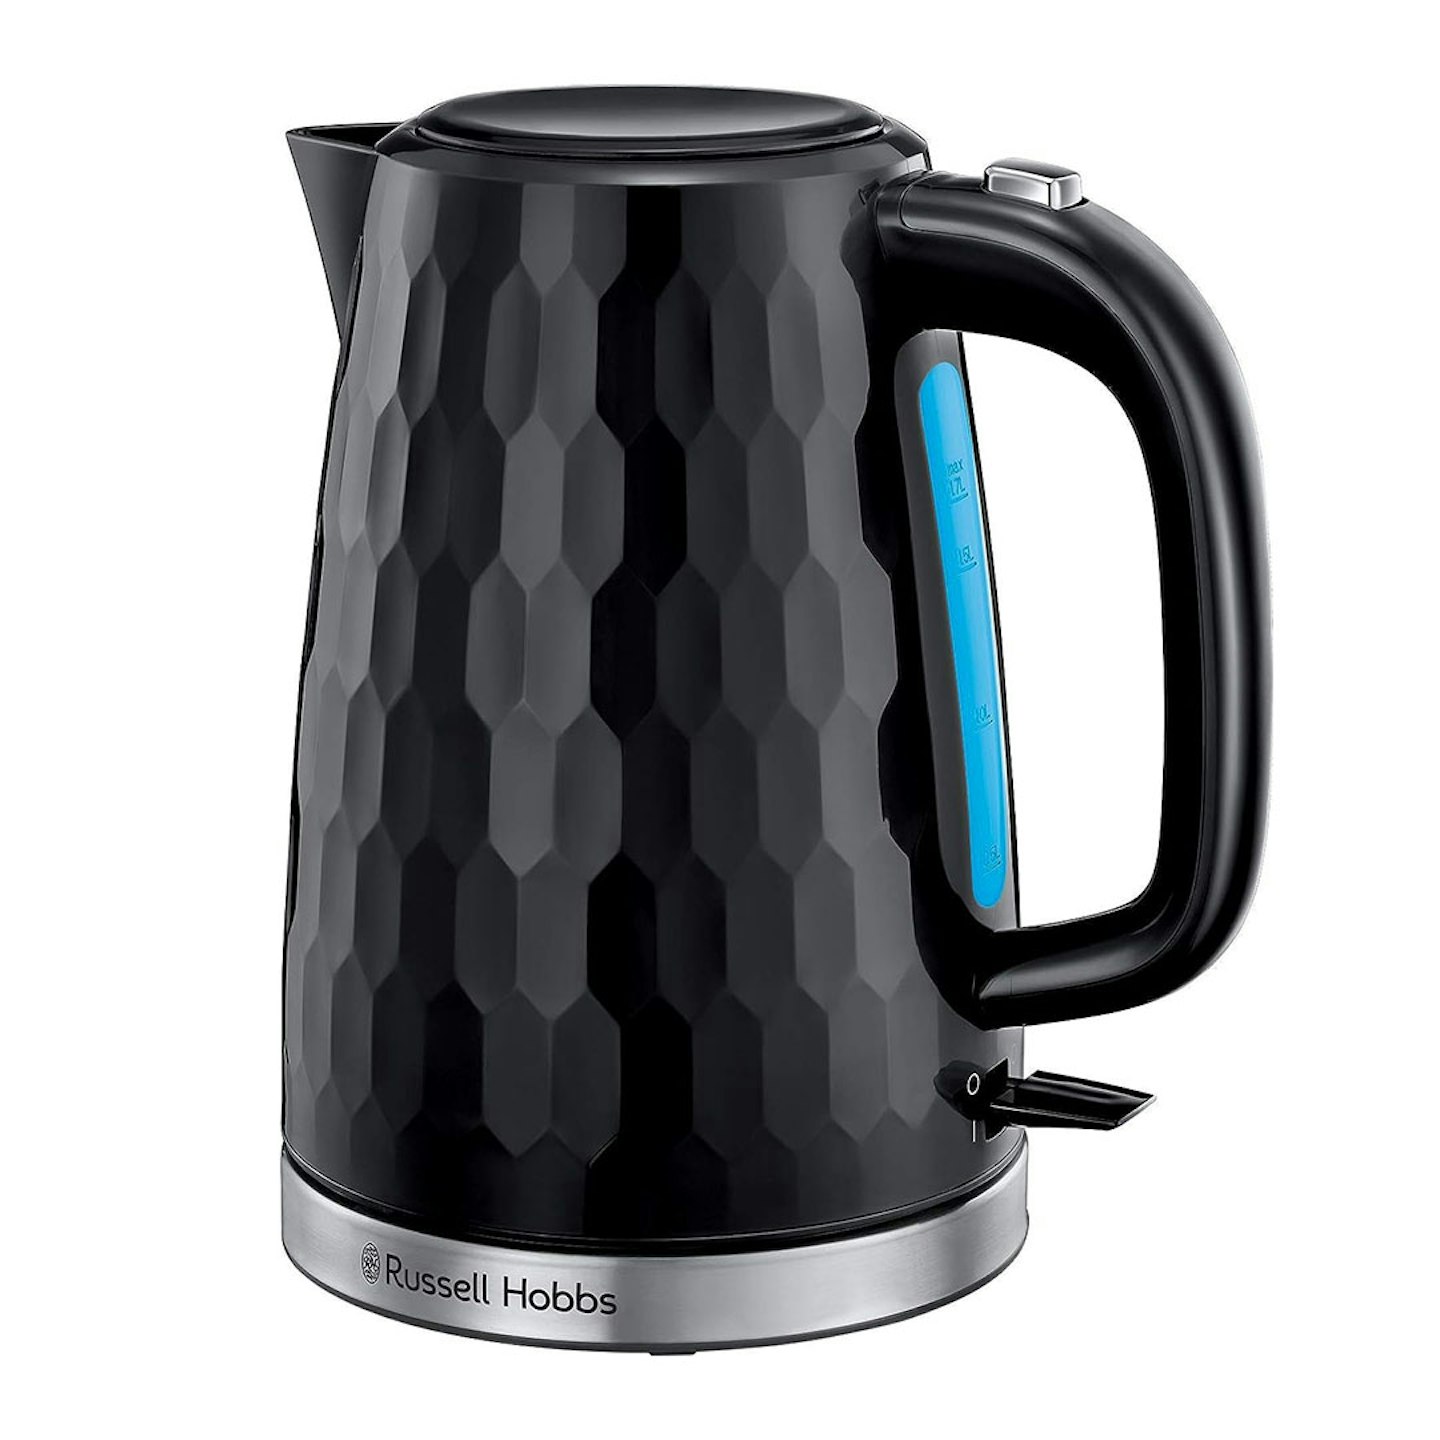 Russell Hobbs 26051 Cordless Electric Kettle